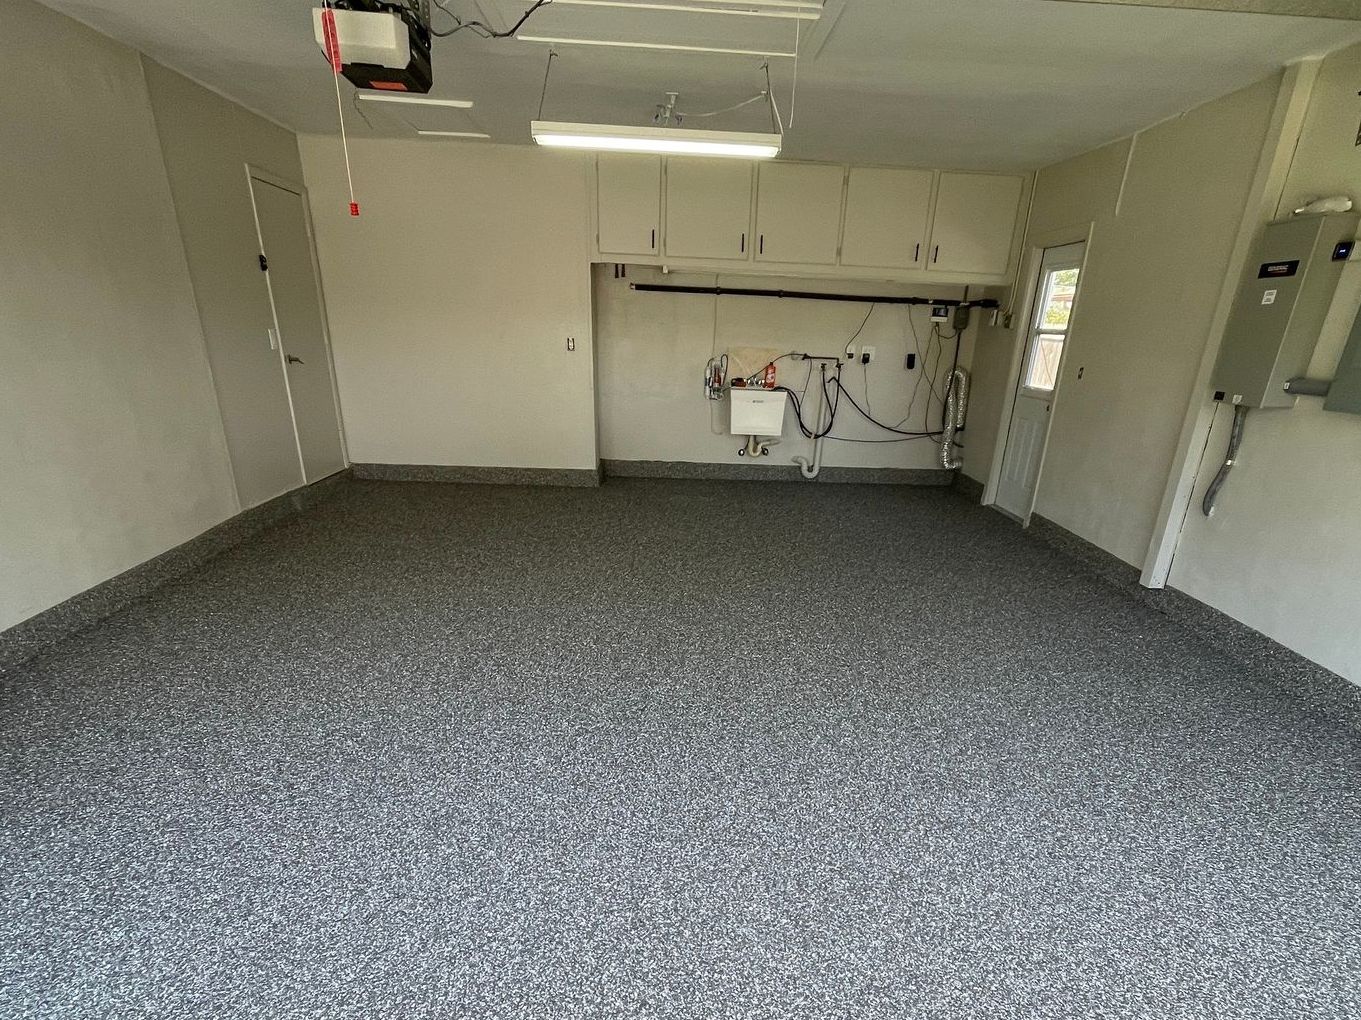 Clean and empty garage with newly applied concrete coating on floor and bottom part of walls